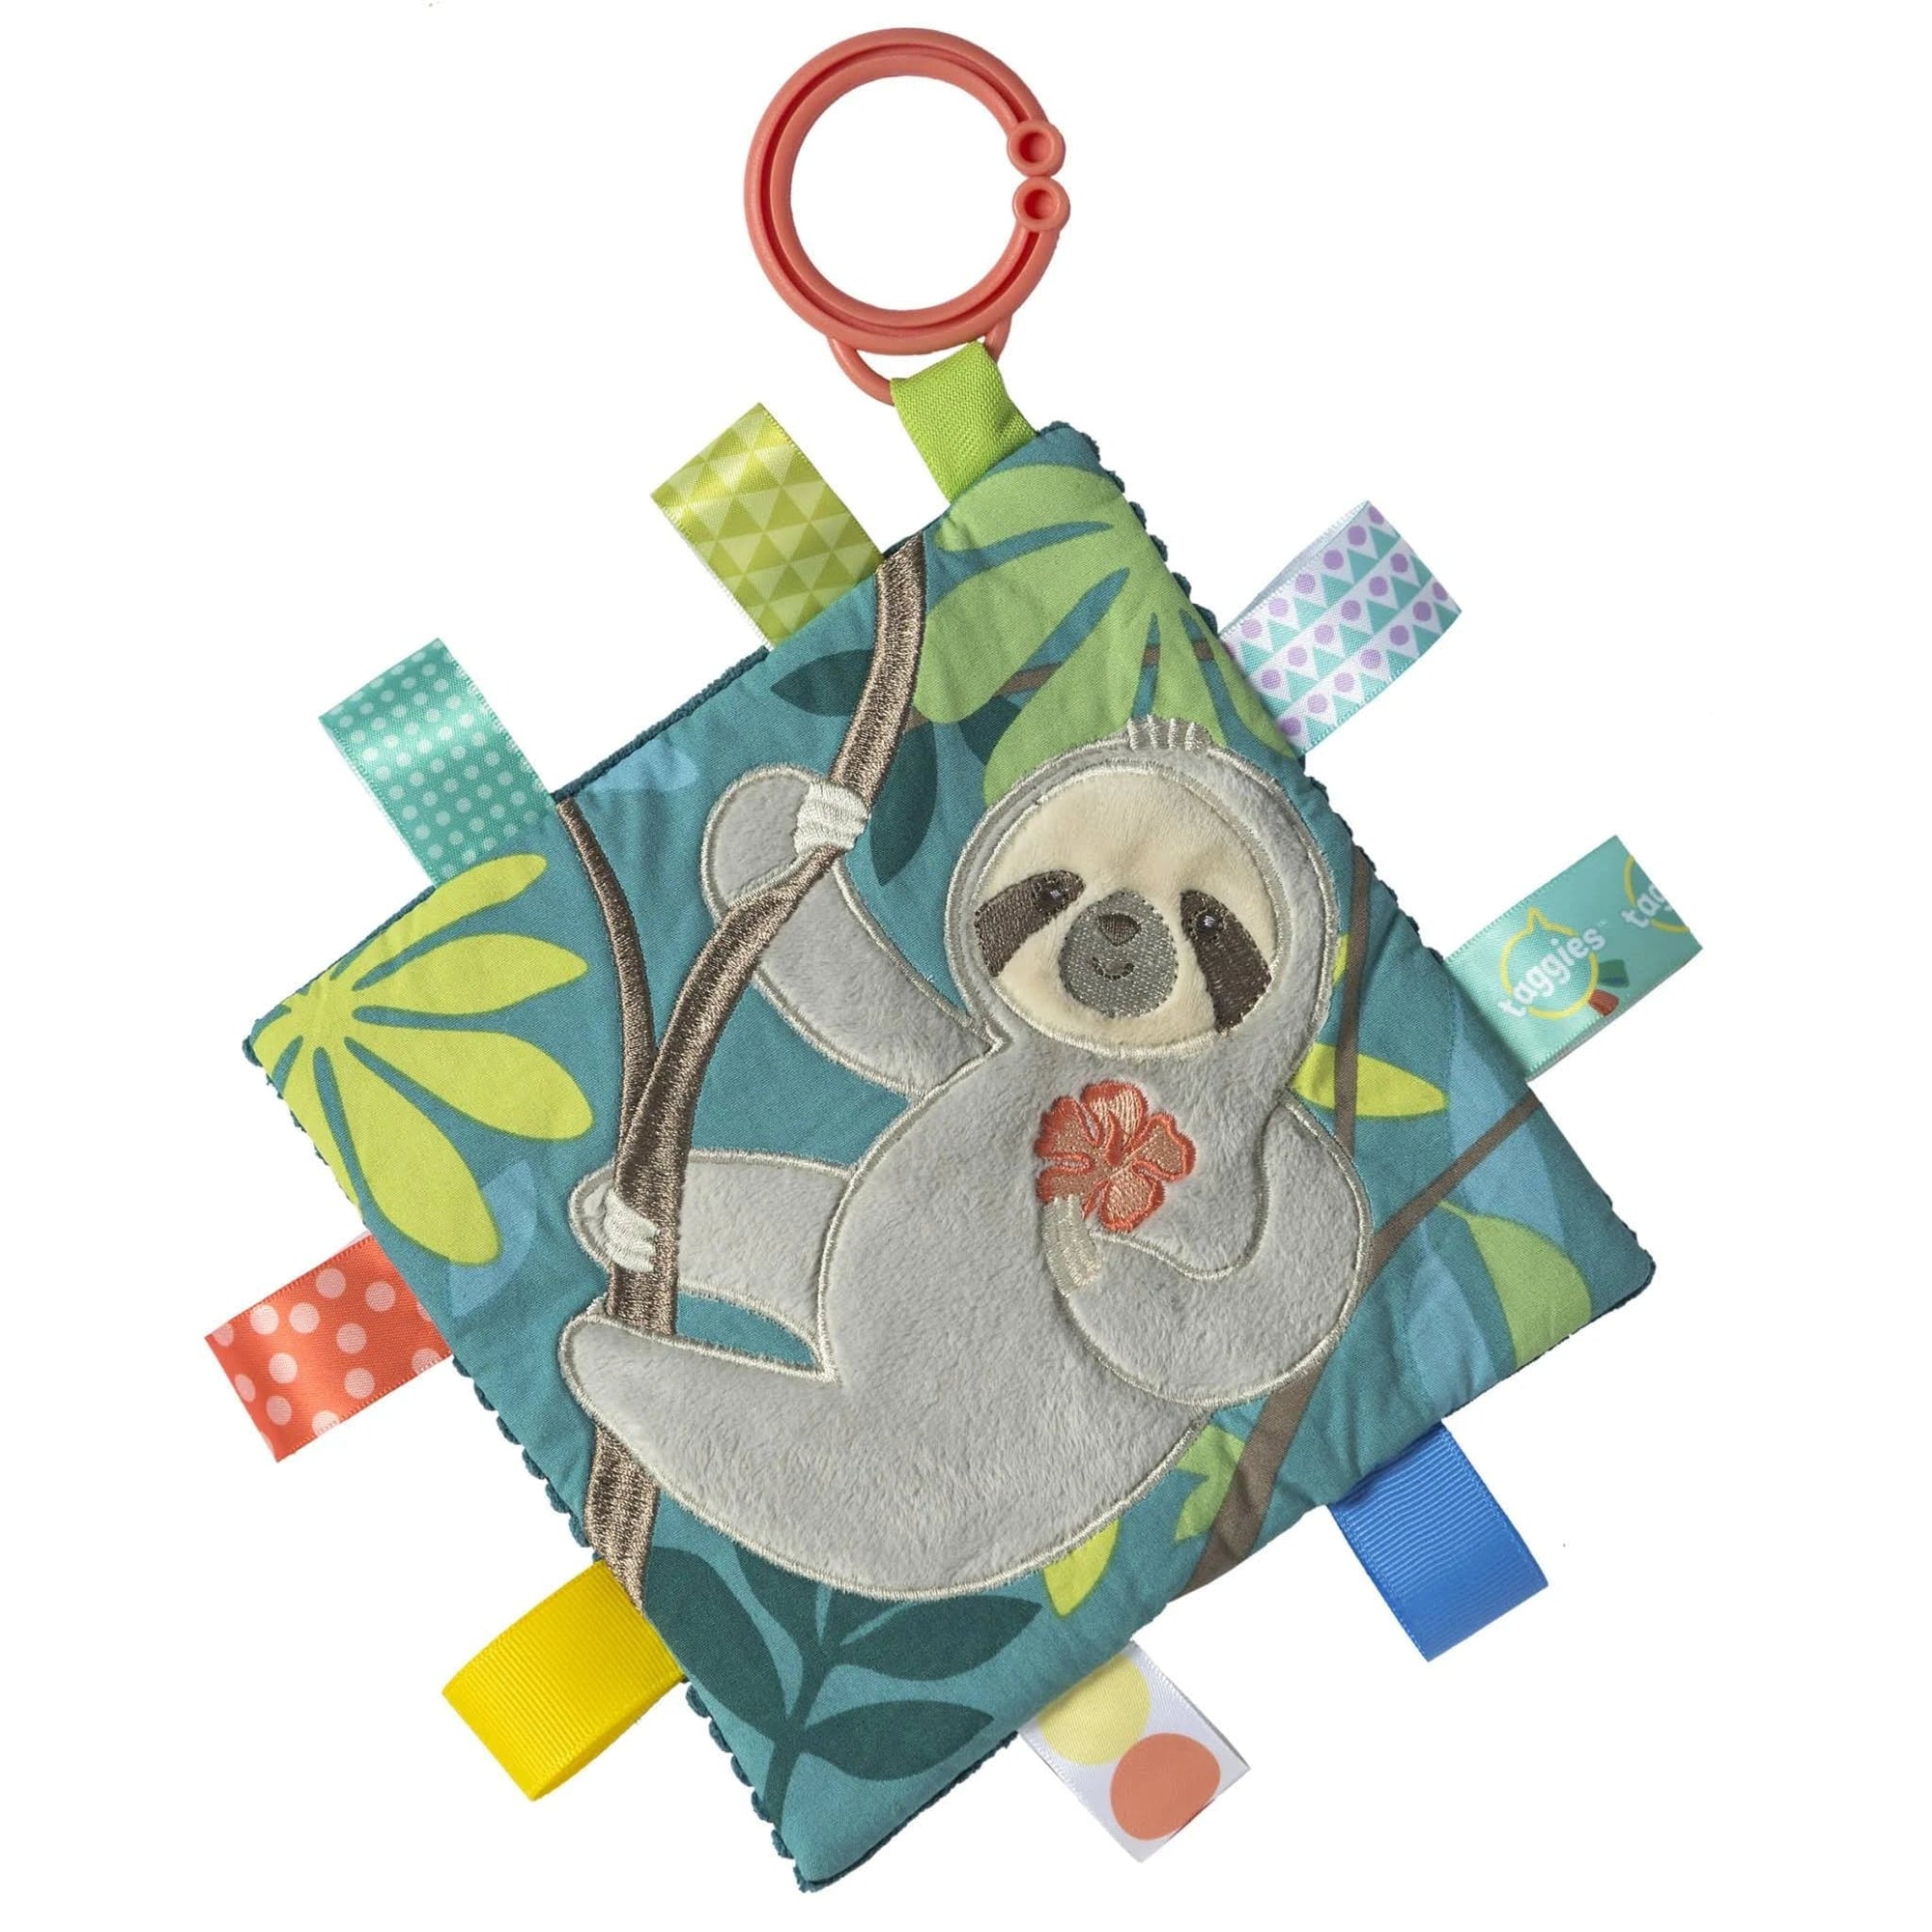 Mary Meyer crinkle cloth Mary Meyer Baby Taggies Crinkle Me - Sloth